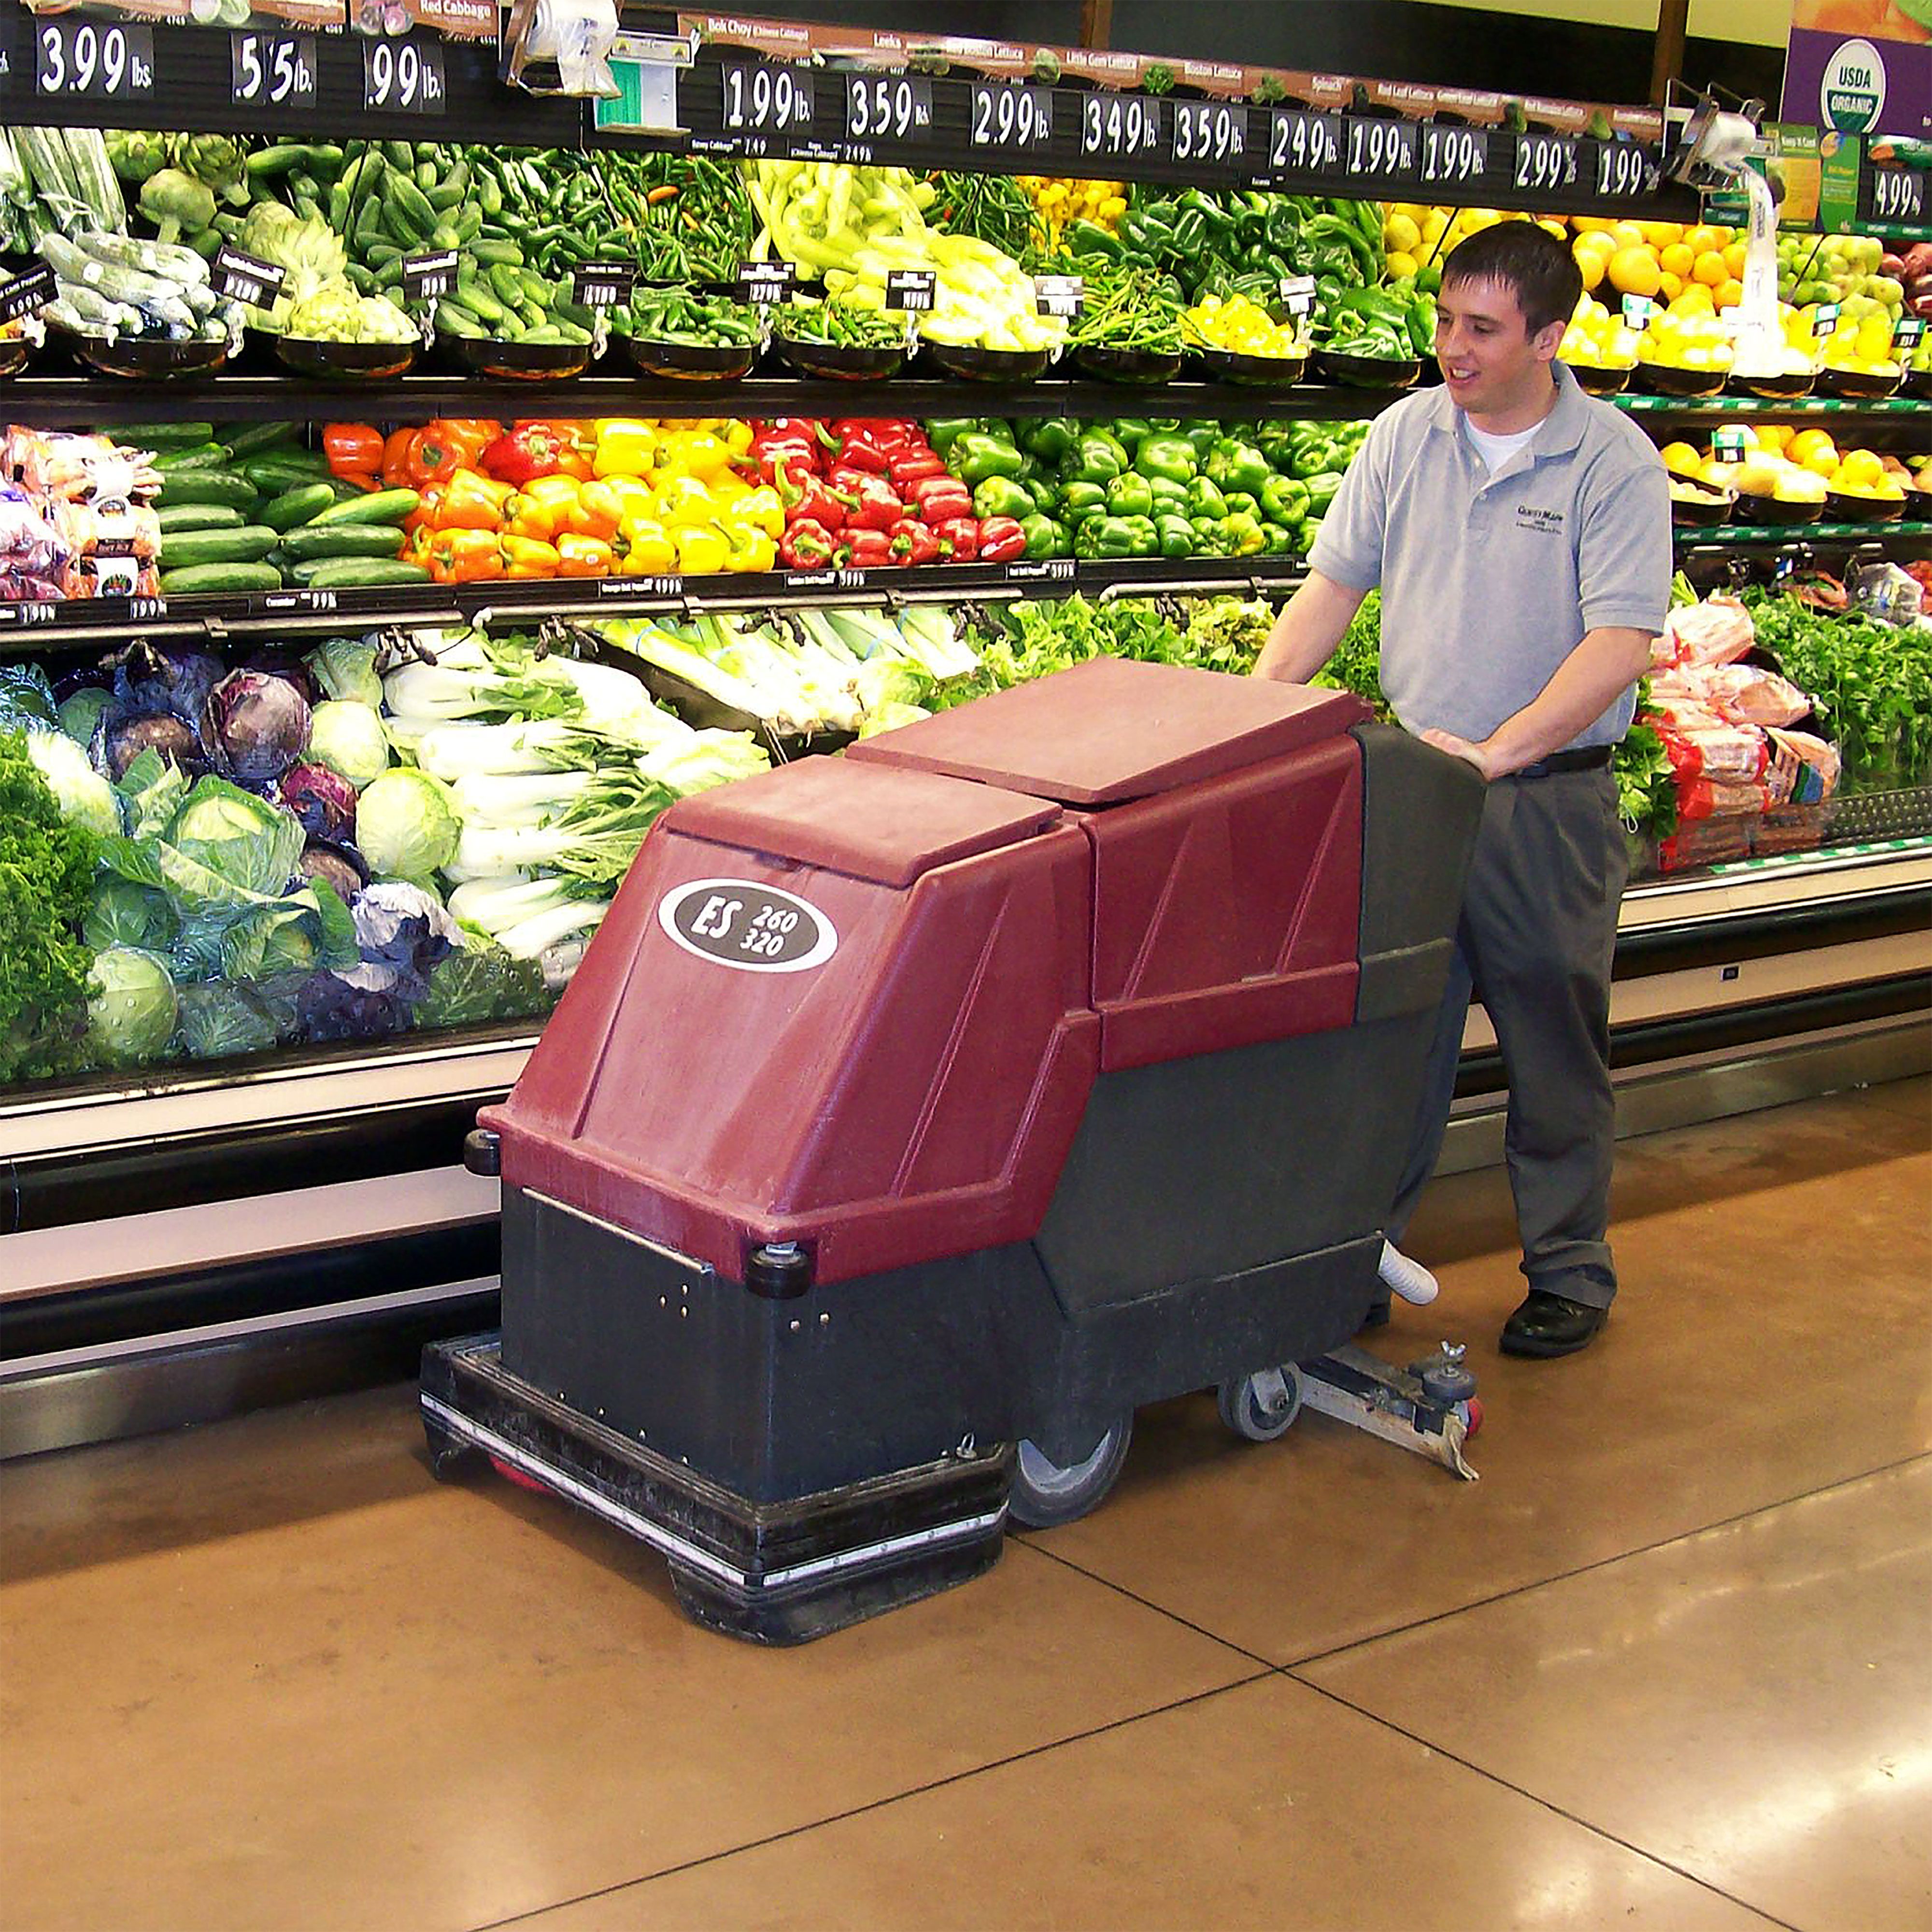 commercial floor maintenance equipment being used